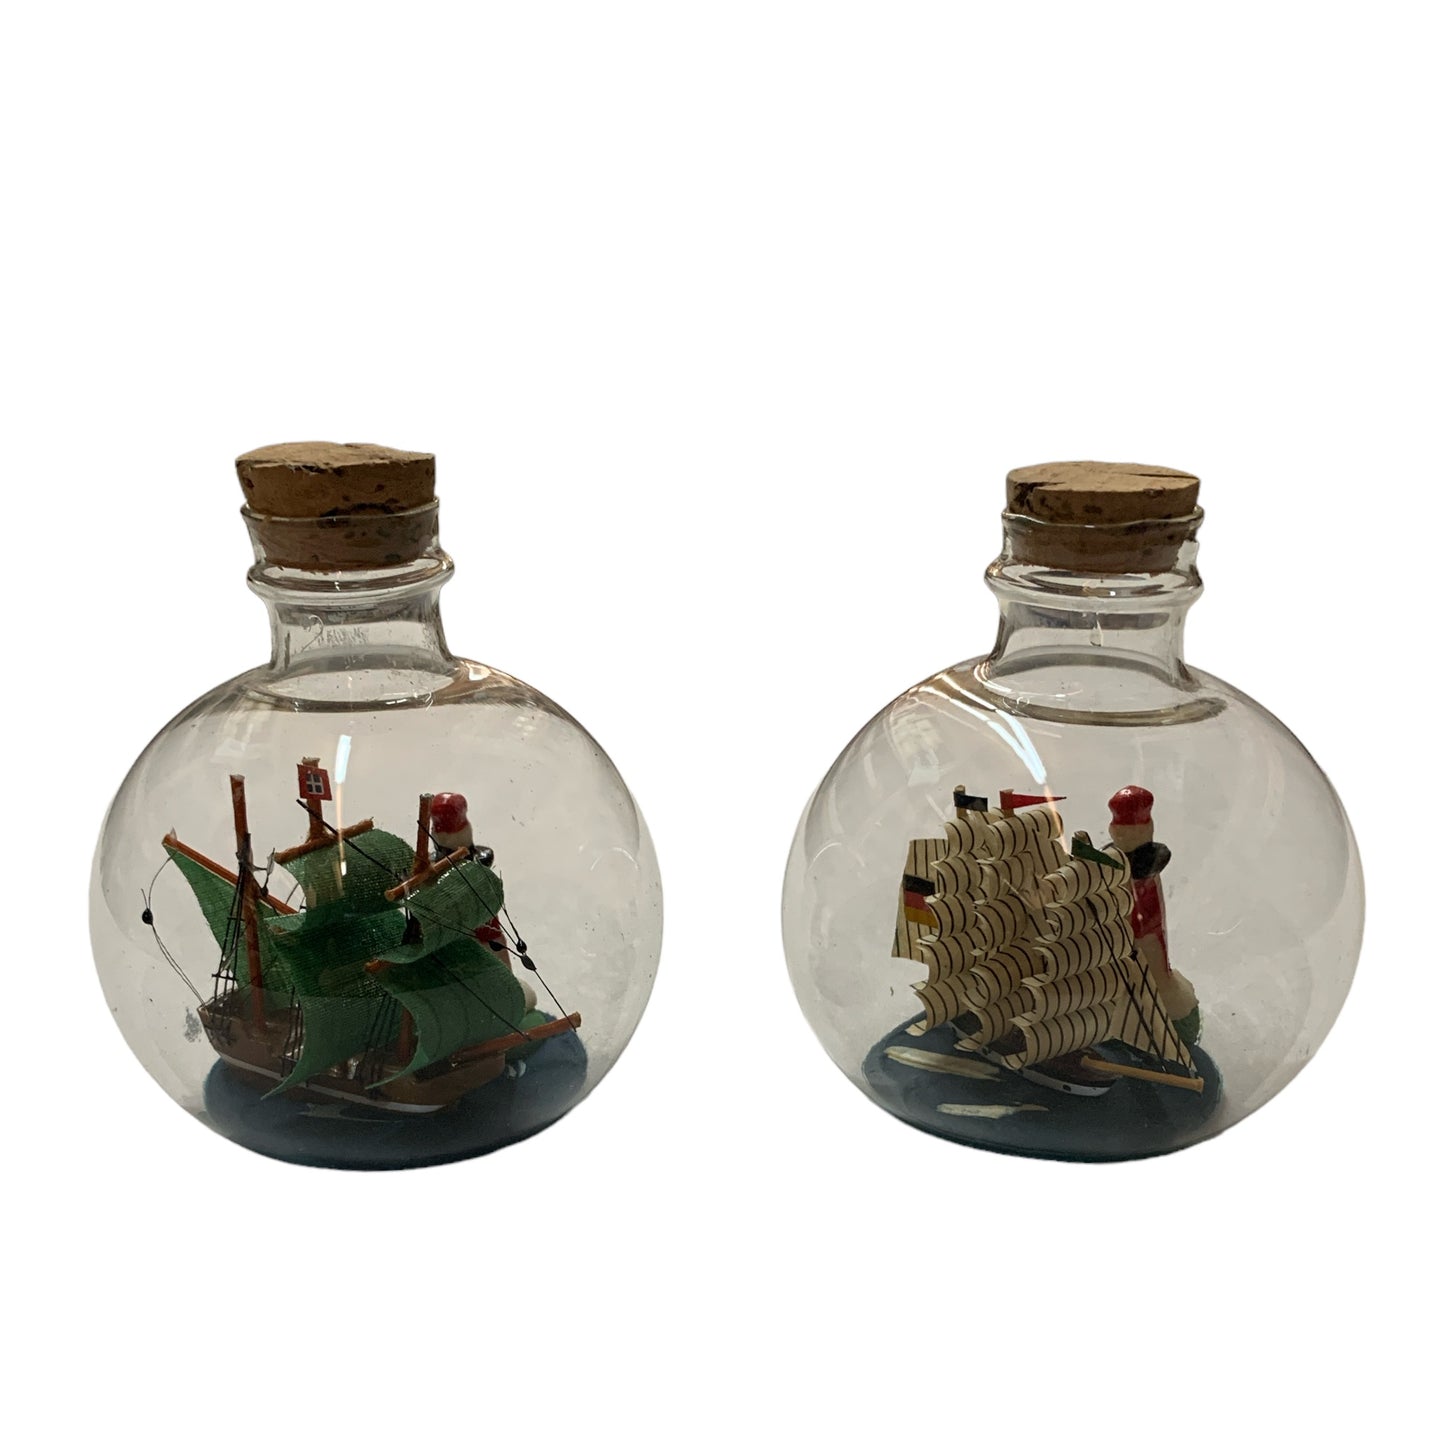 SHIP IN A BOTTLE- ROUND BLUE OR GREEN 3"